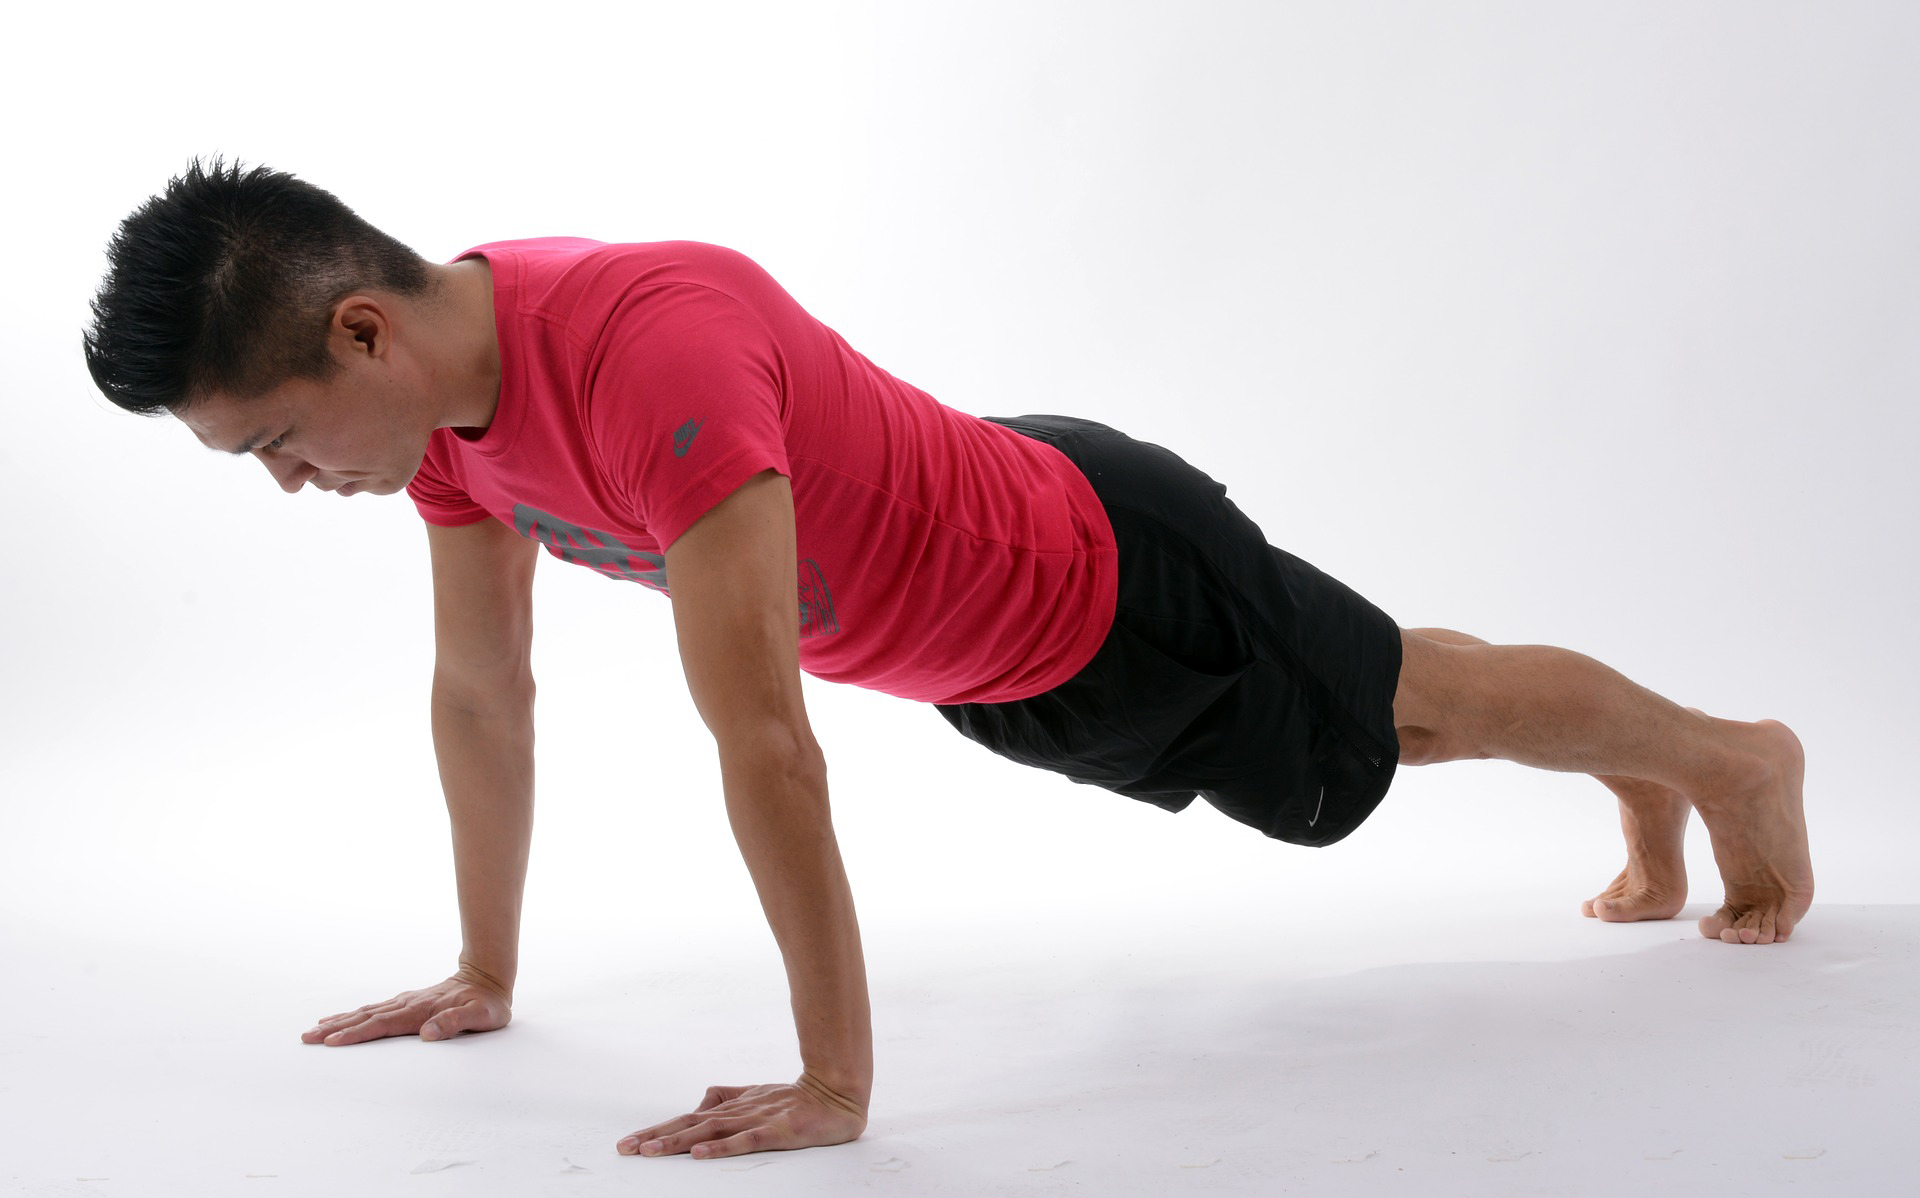 How to tighten your core, abs during exercise (and why it's so